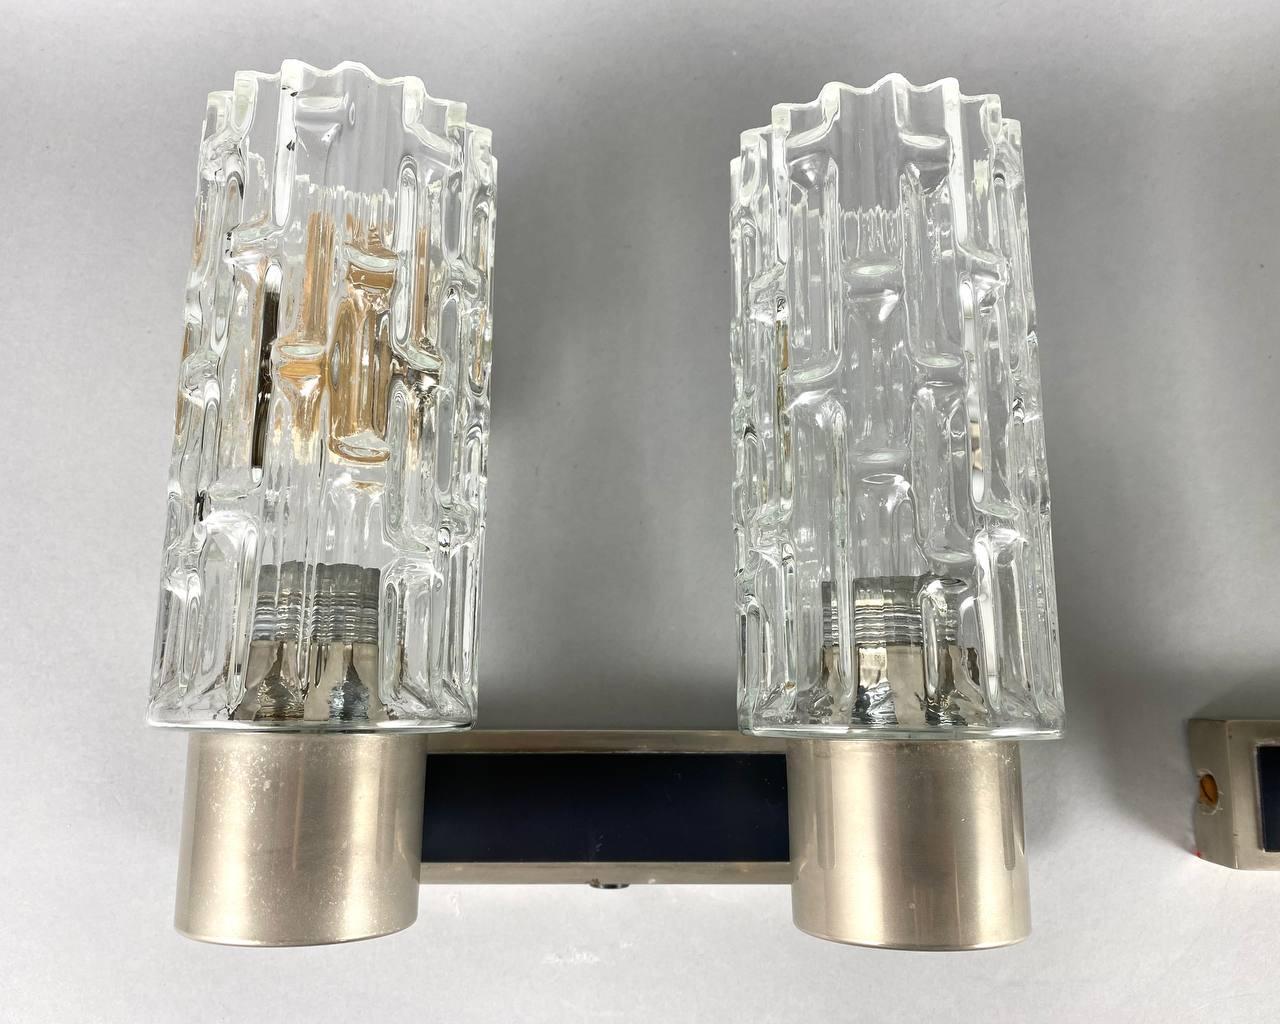 Mid-20th Century Vintage Designer Pair of Double Light Sconces by Hillebrand, Germany For Sale